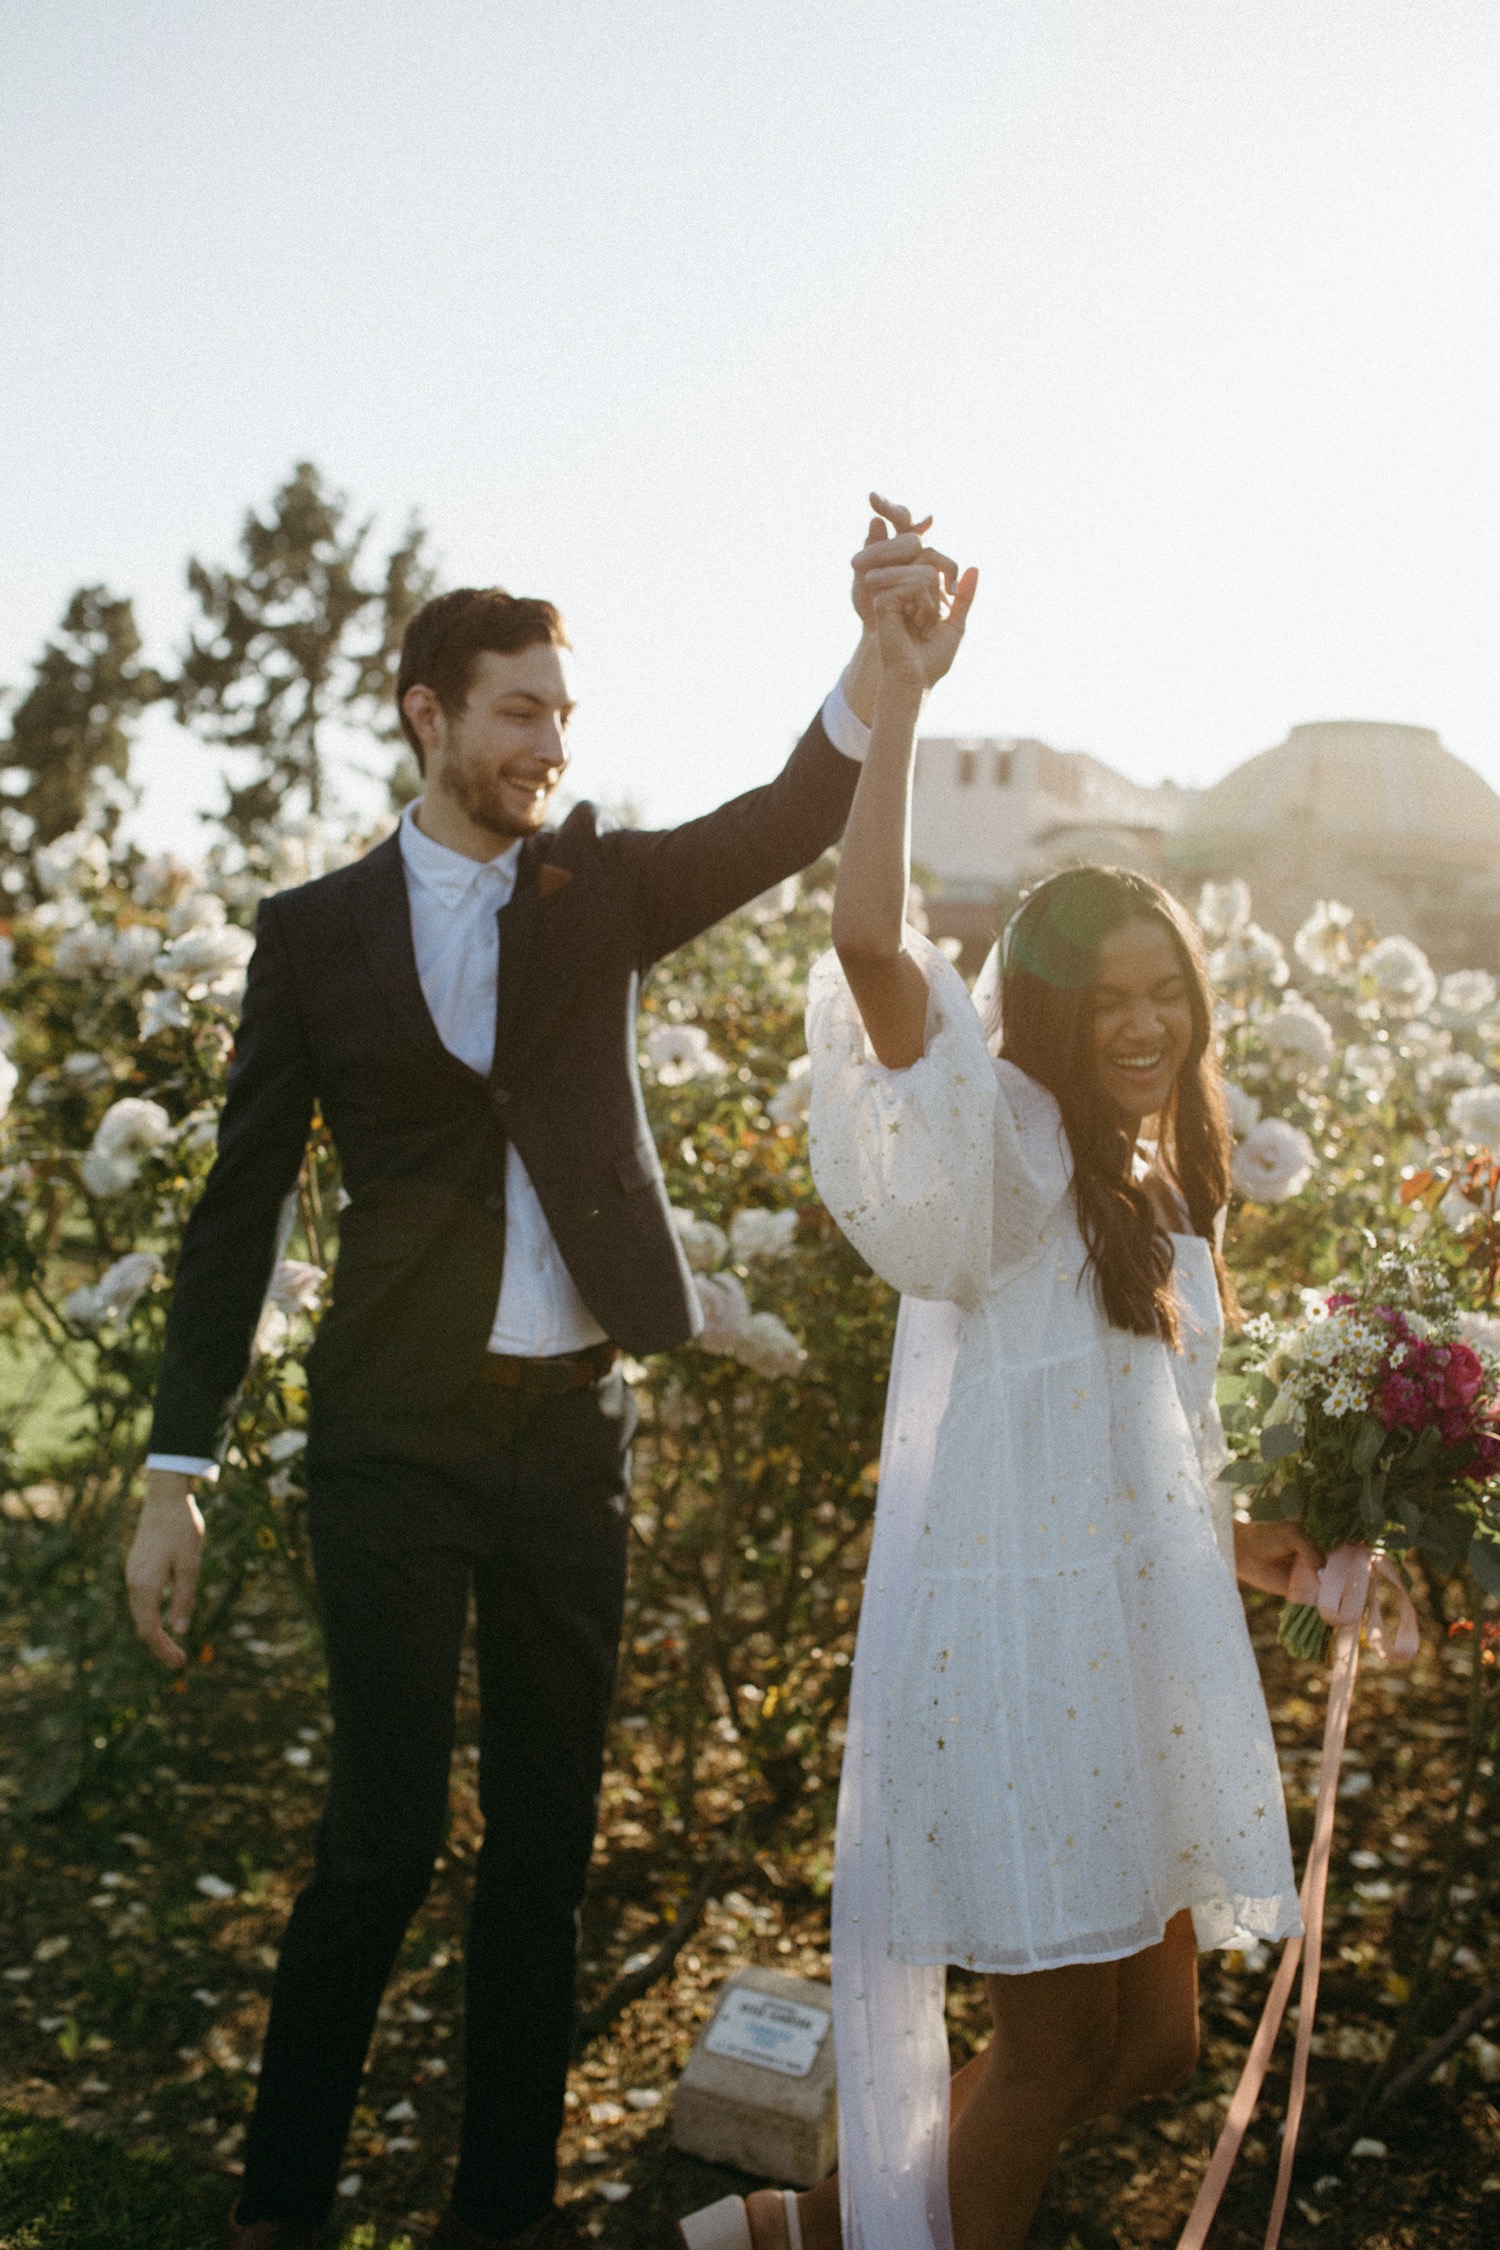 Couple dance in a rose garden during their engagement photos in Los Angeles.